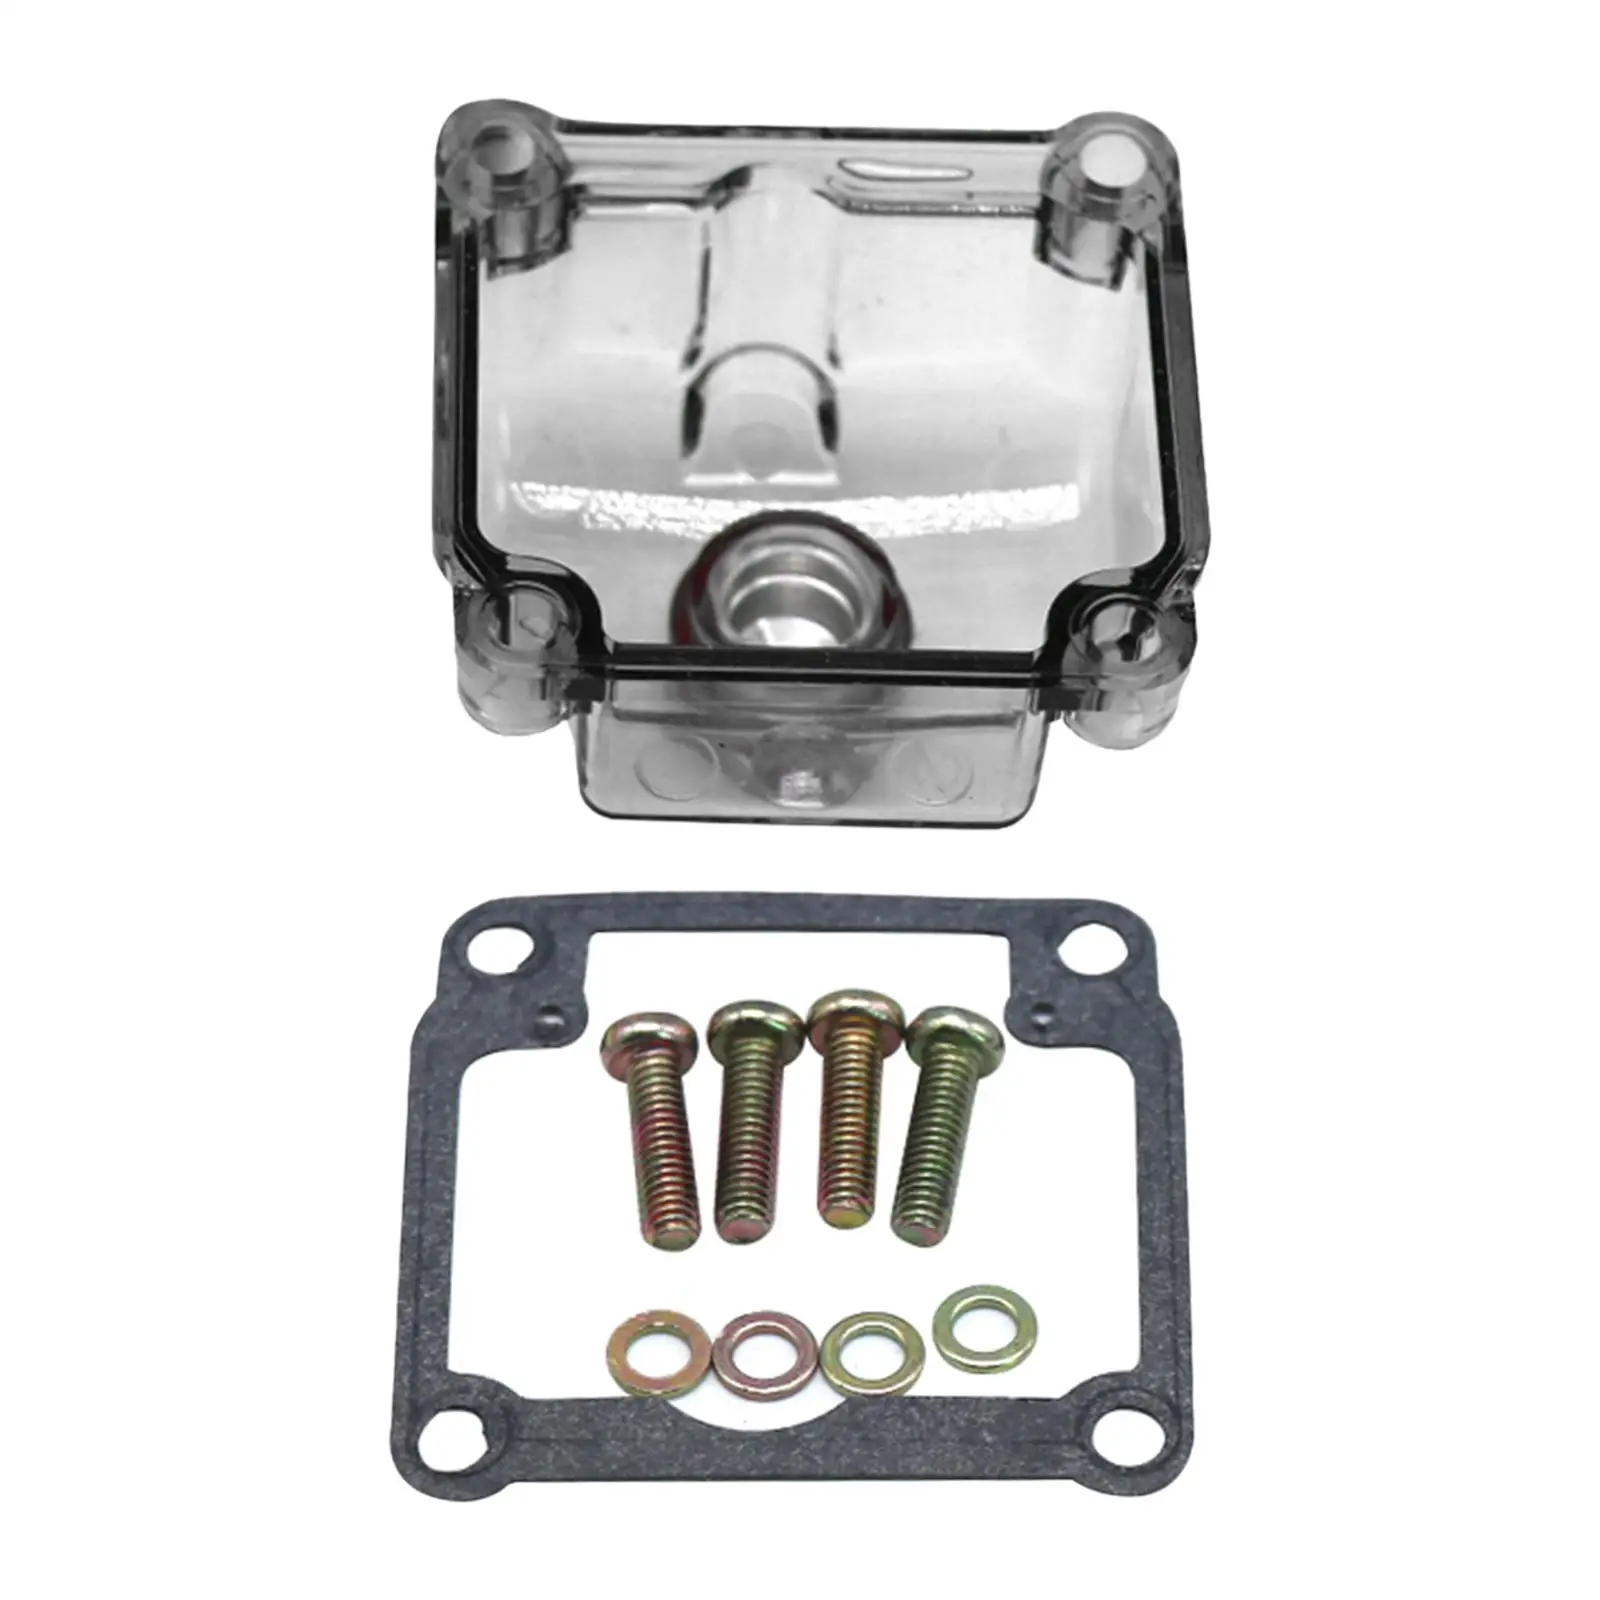 Carburetor Float Bowl Chamber Accessories with Gasket and Mounting Screws Fit for Dellorto Phbg High Performance Durable